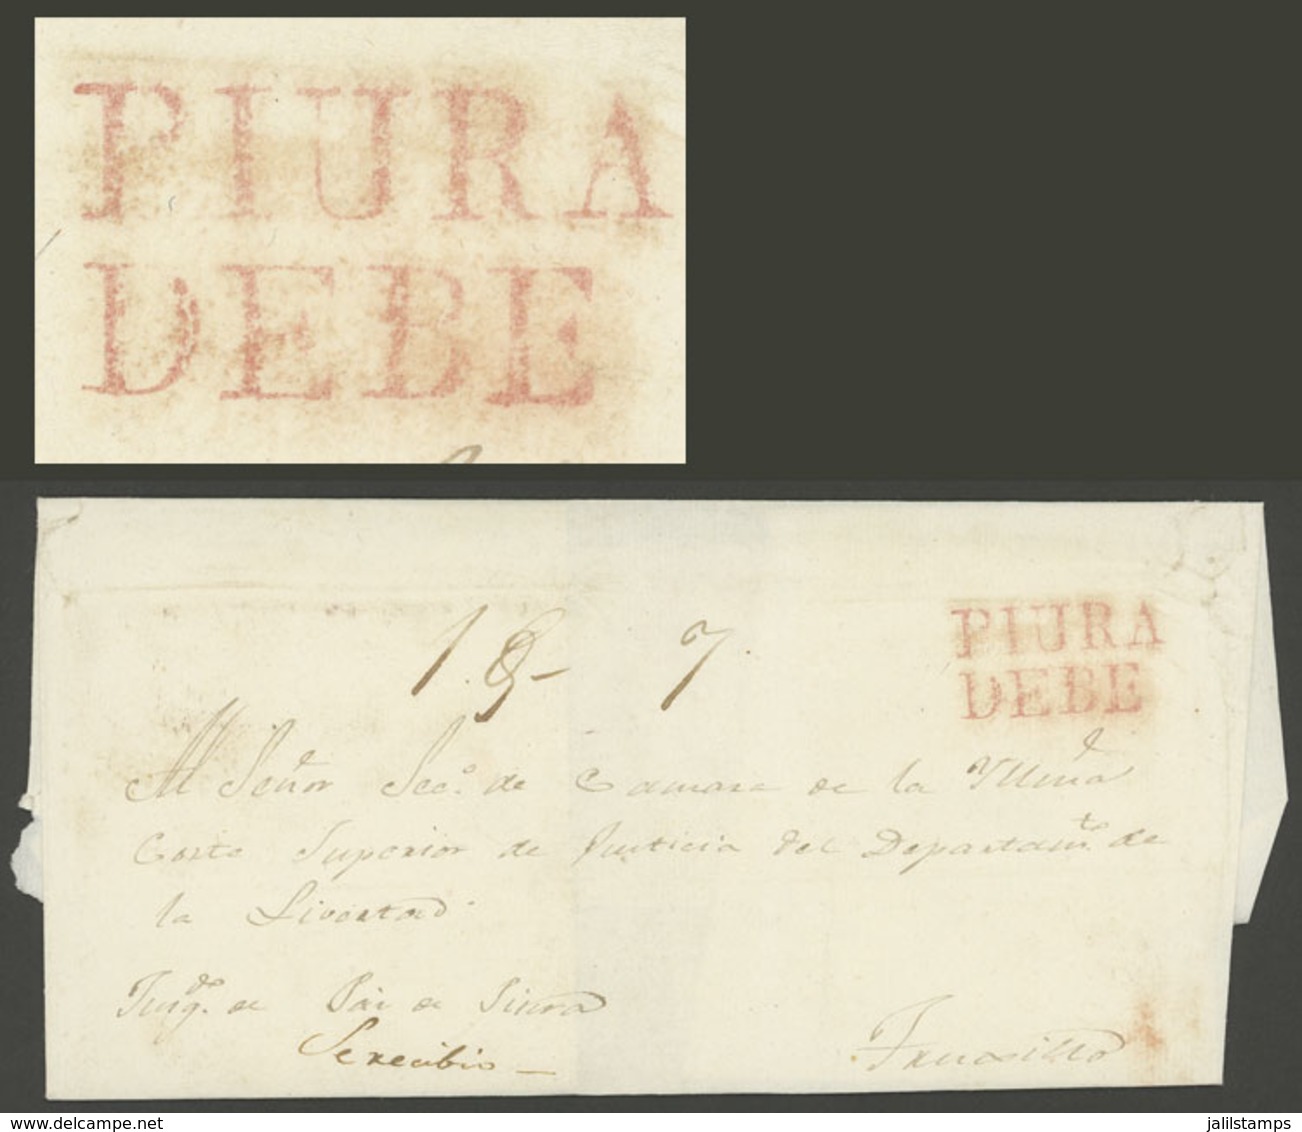 PERU: Folded Cover Dated 8/SE/1840 And Sent To Trujillo, With 2-line PIURA DEBE Mark In Red, Excellent Quality, Rare! - Peru